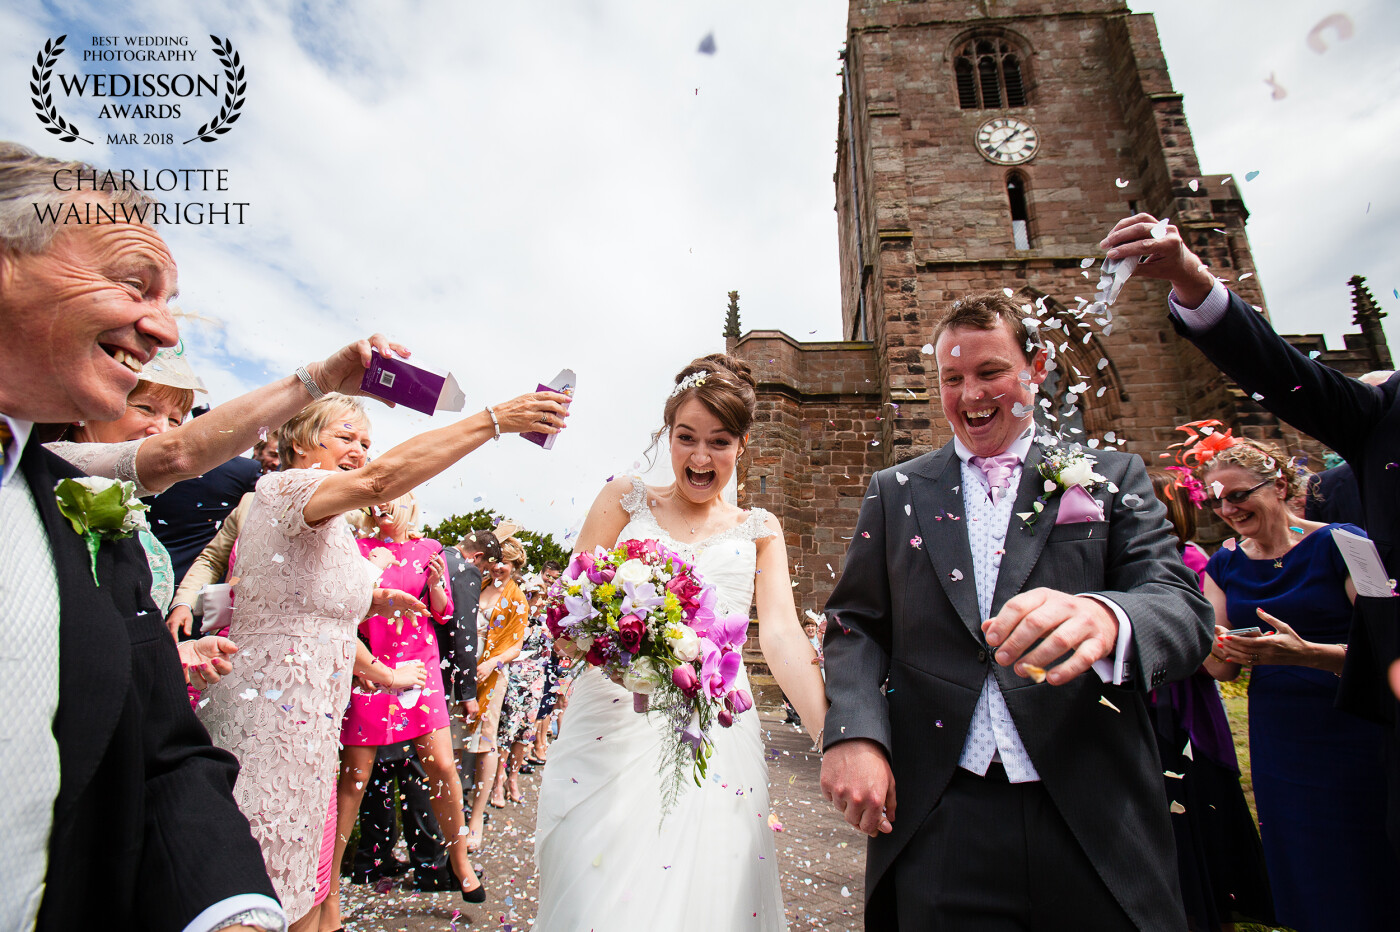 Kate and Jonny got married at one of my favourite churches in Cheshire. Reverend Tim would make anyone go to church! After an entertaining ceremony, the couple's guests were really excited for the confetti shot and as the wind picked up an abundance of confetti came their way. Kate and Jonny reacted with these cracking expressions!